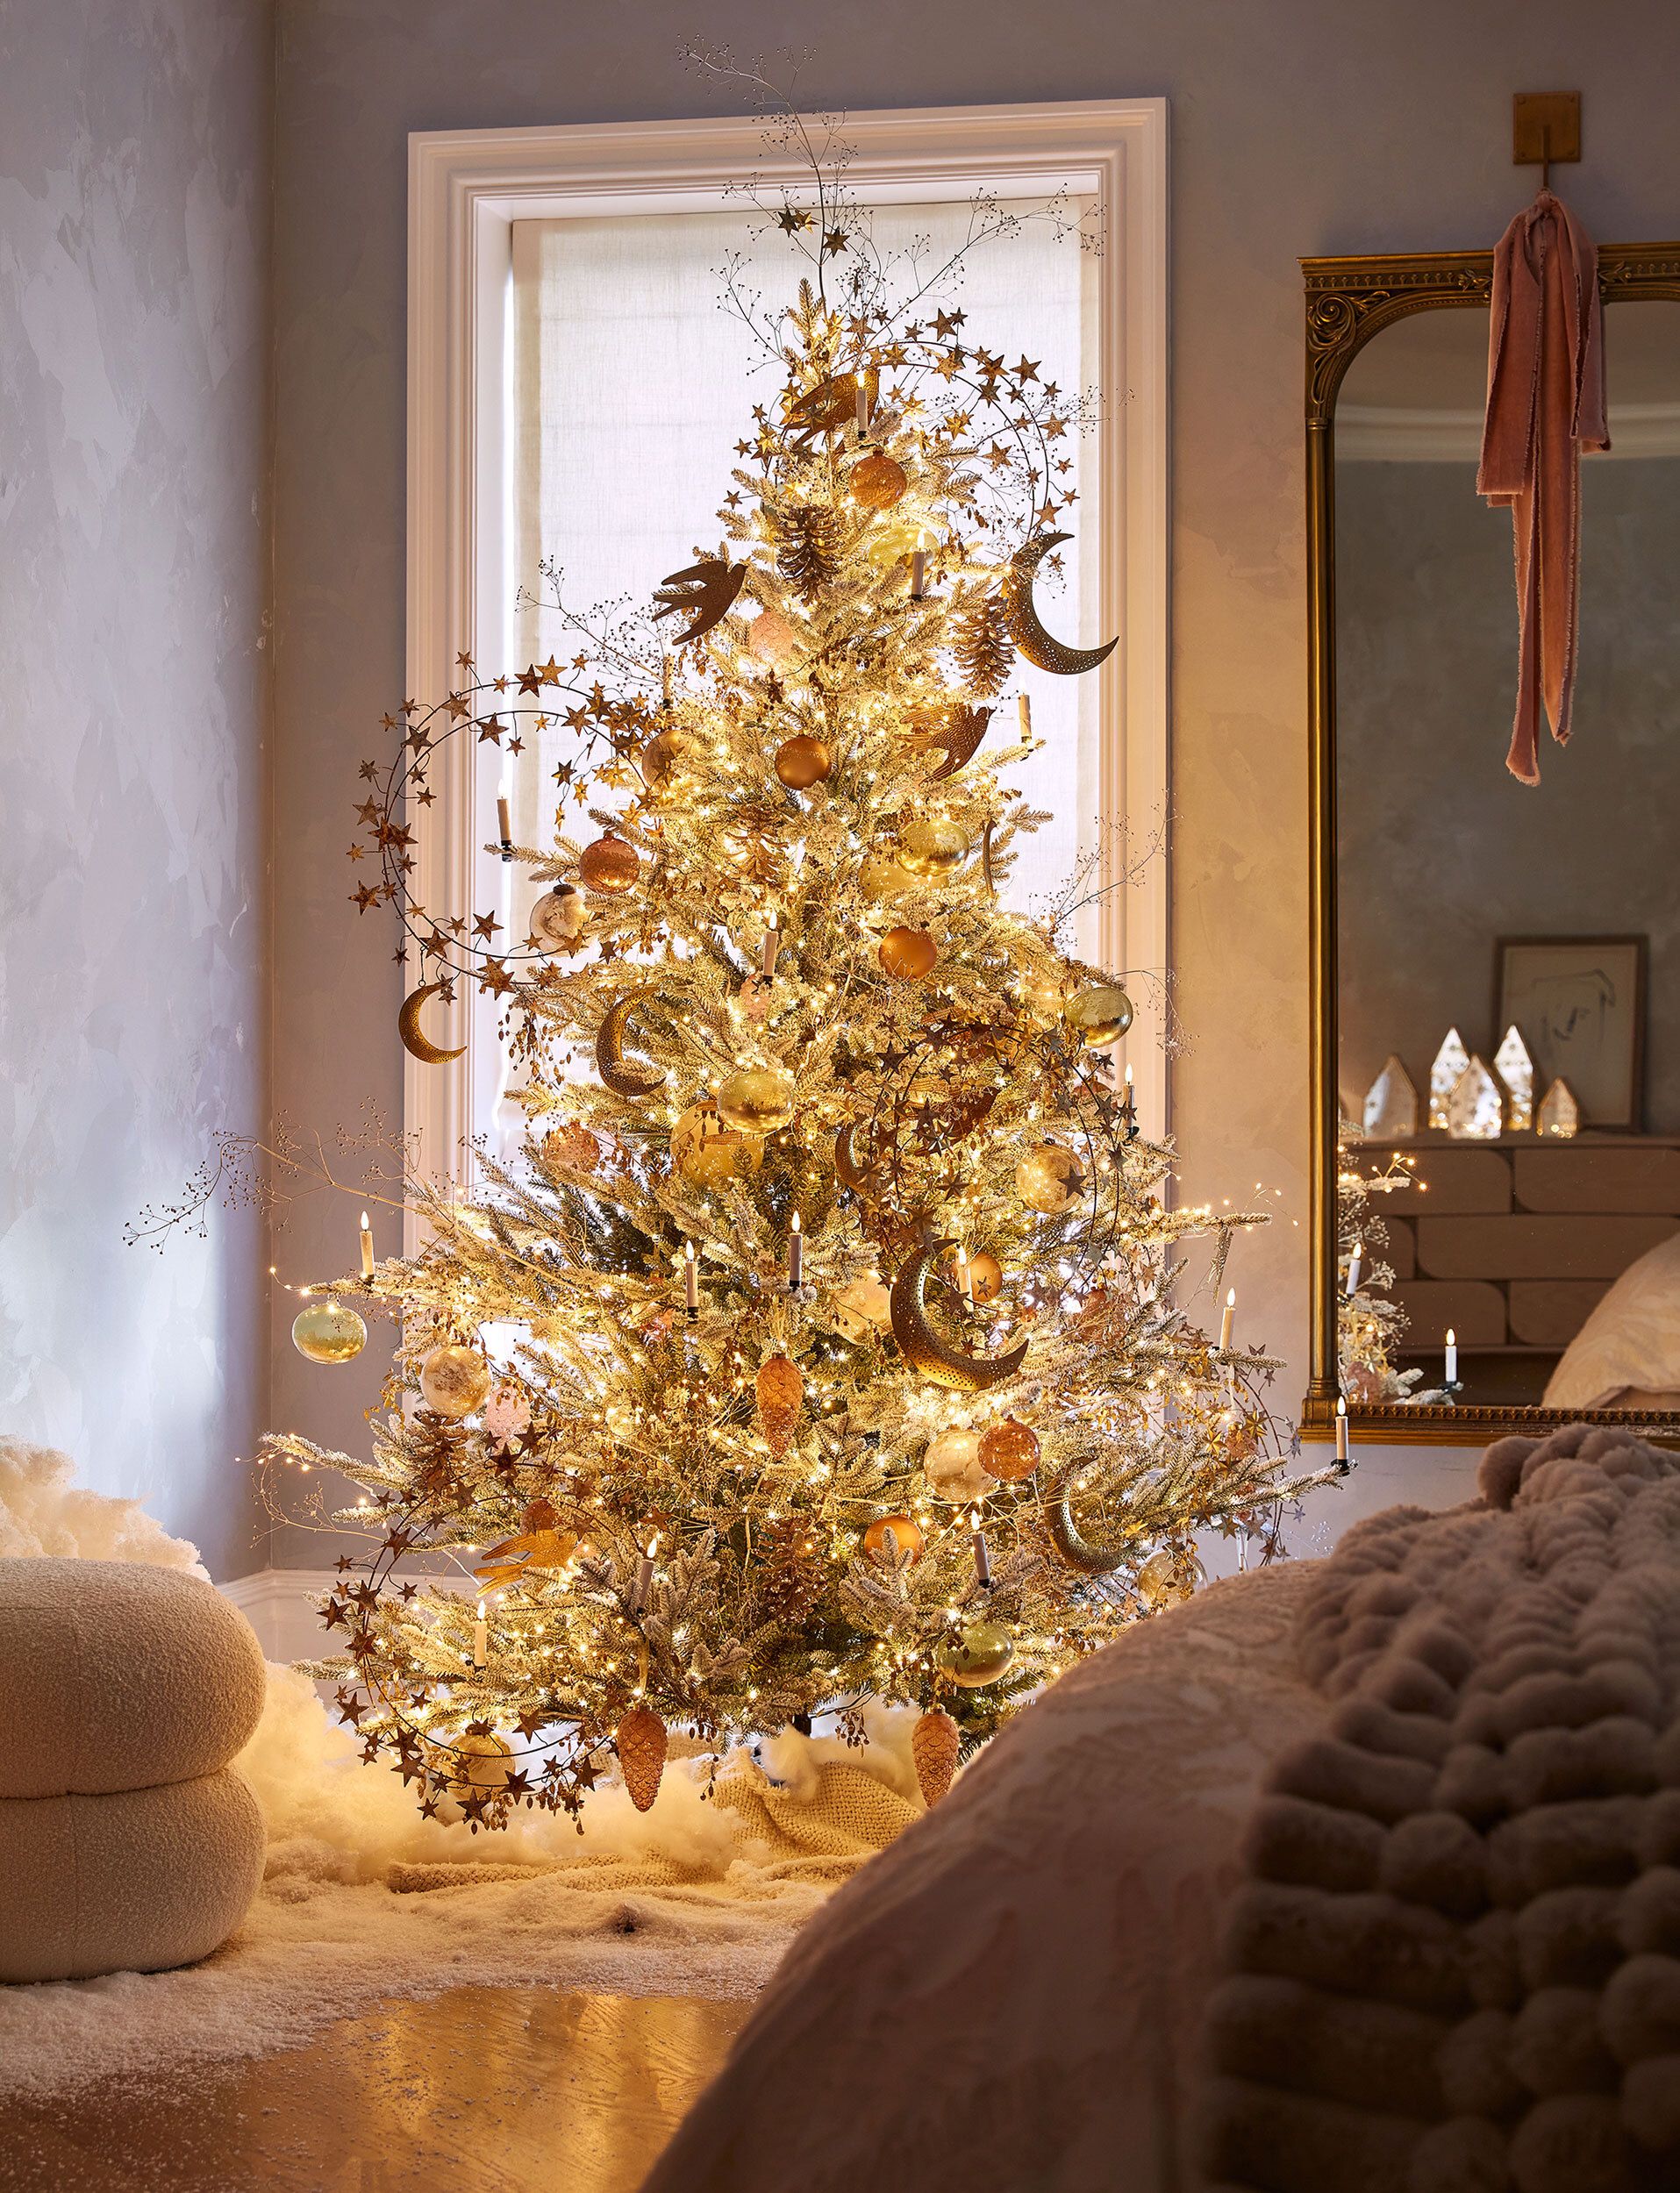 Christmas Trees + A New Family Member - Decor Gold Designs